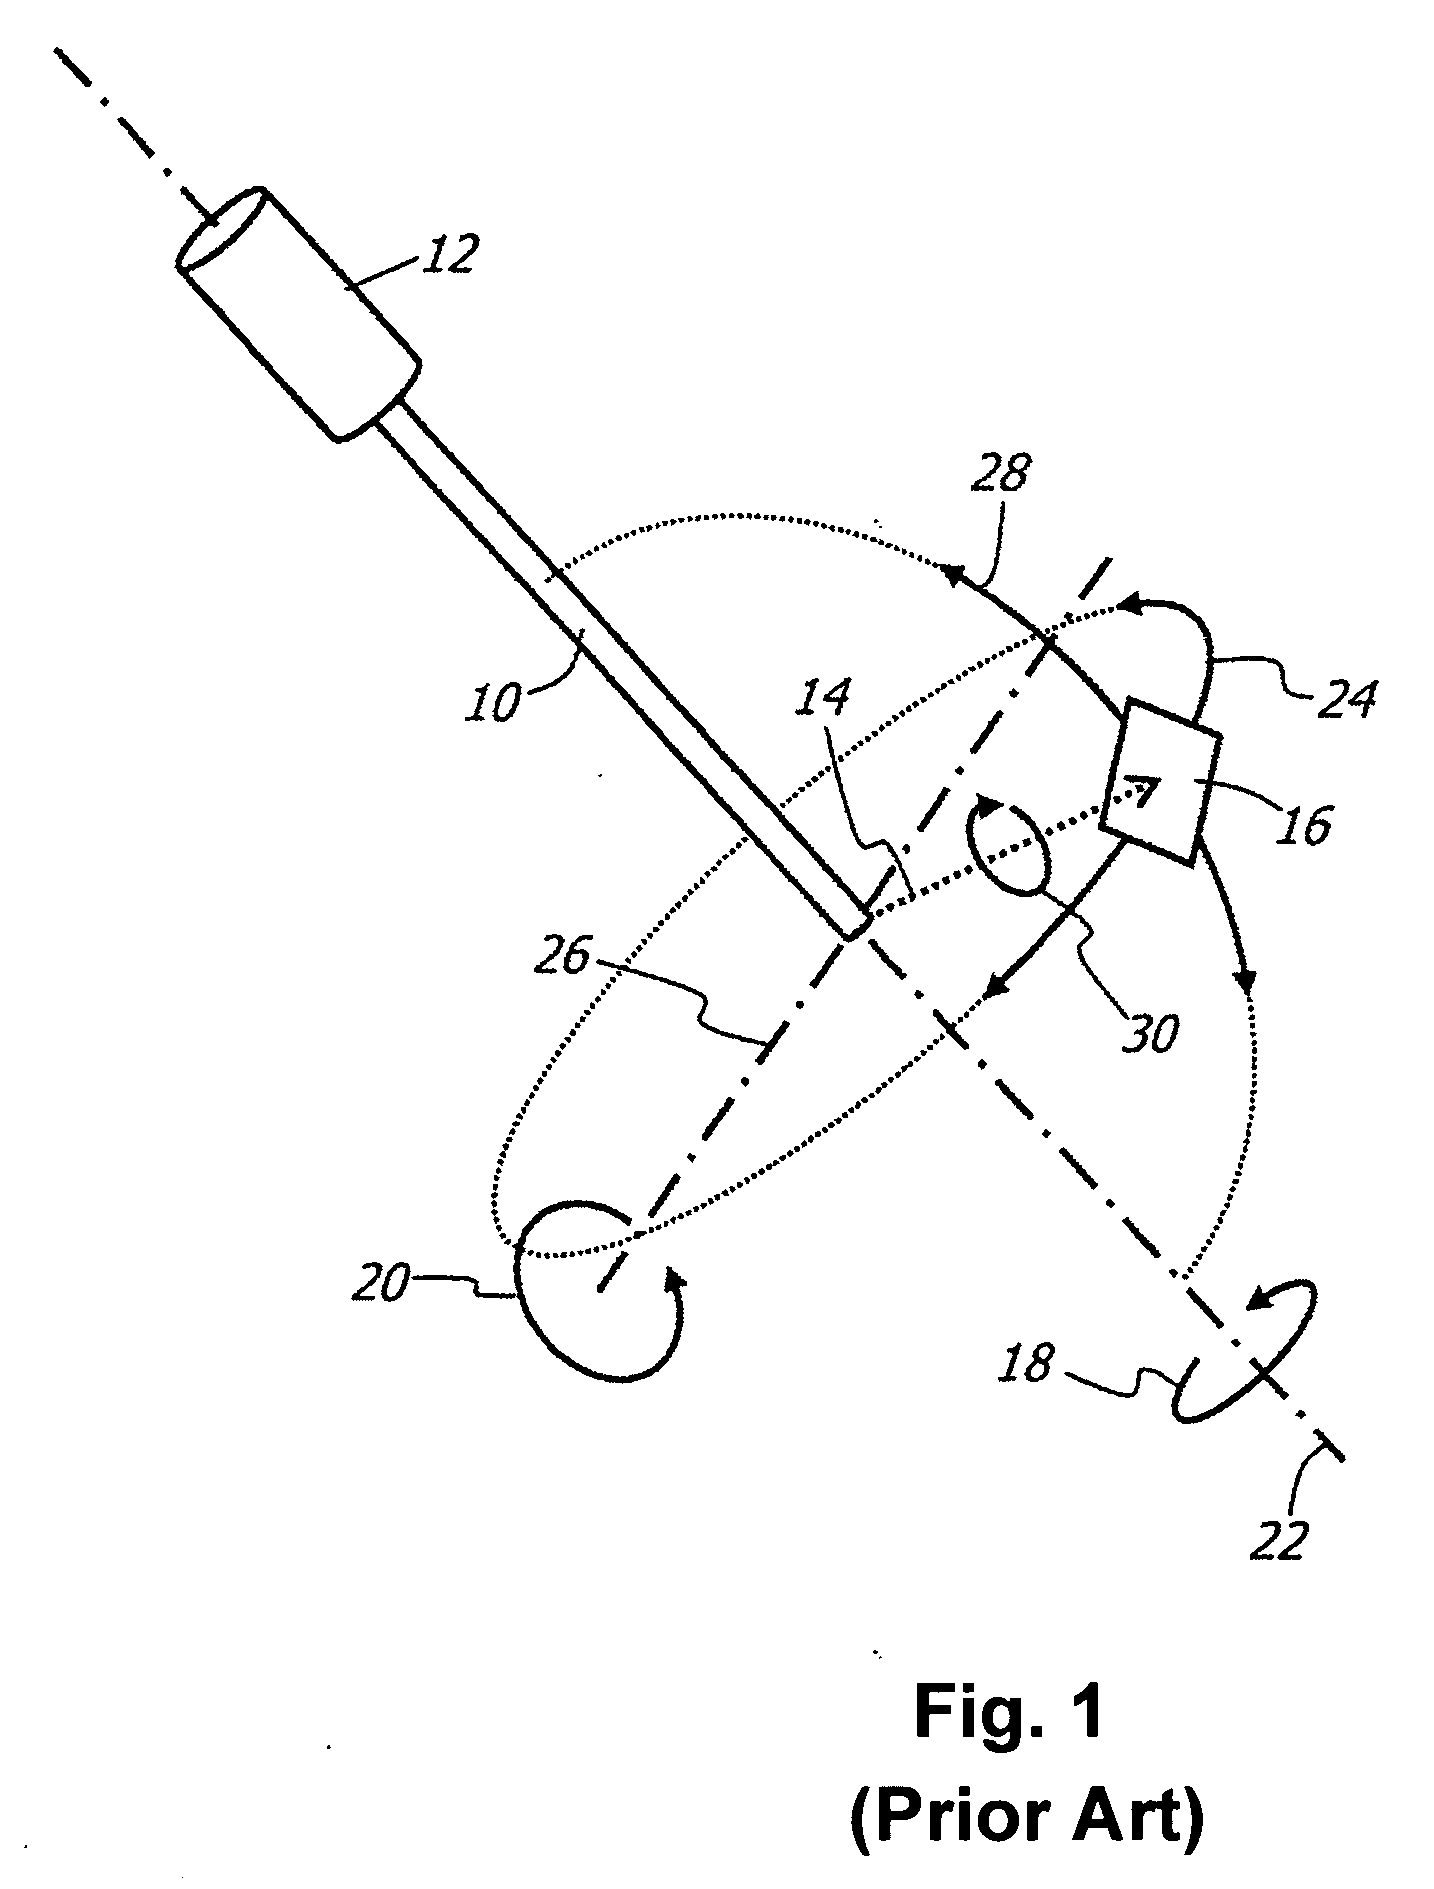 Variable direction of view instrument with distal image sensor